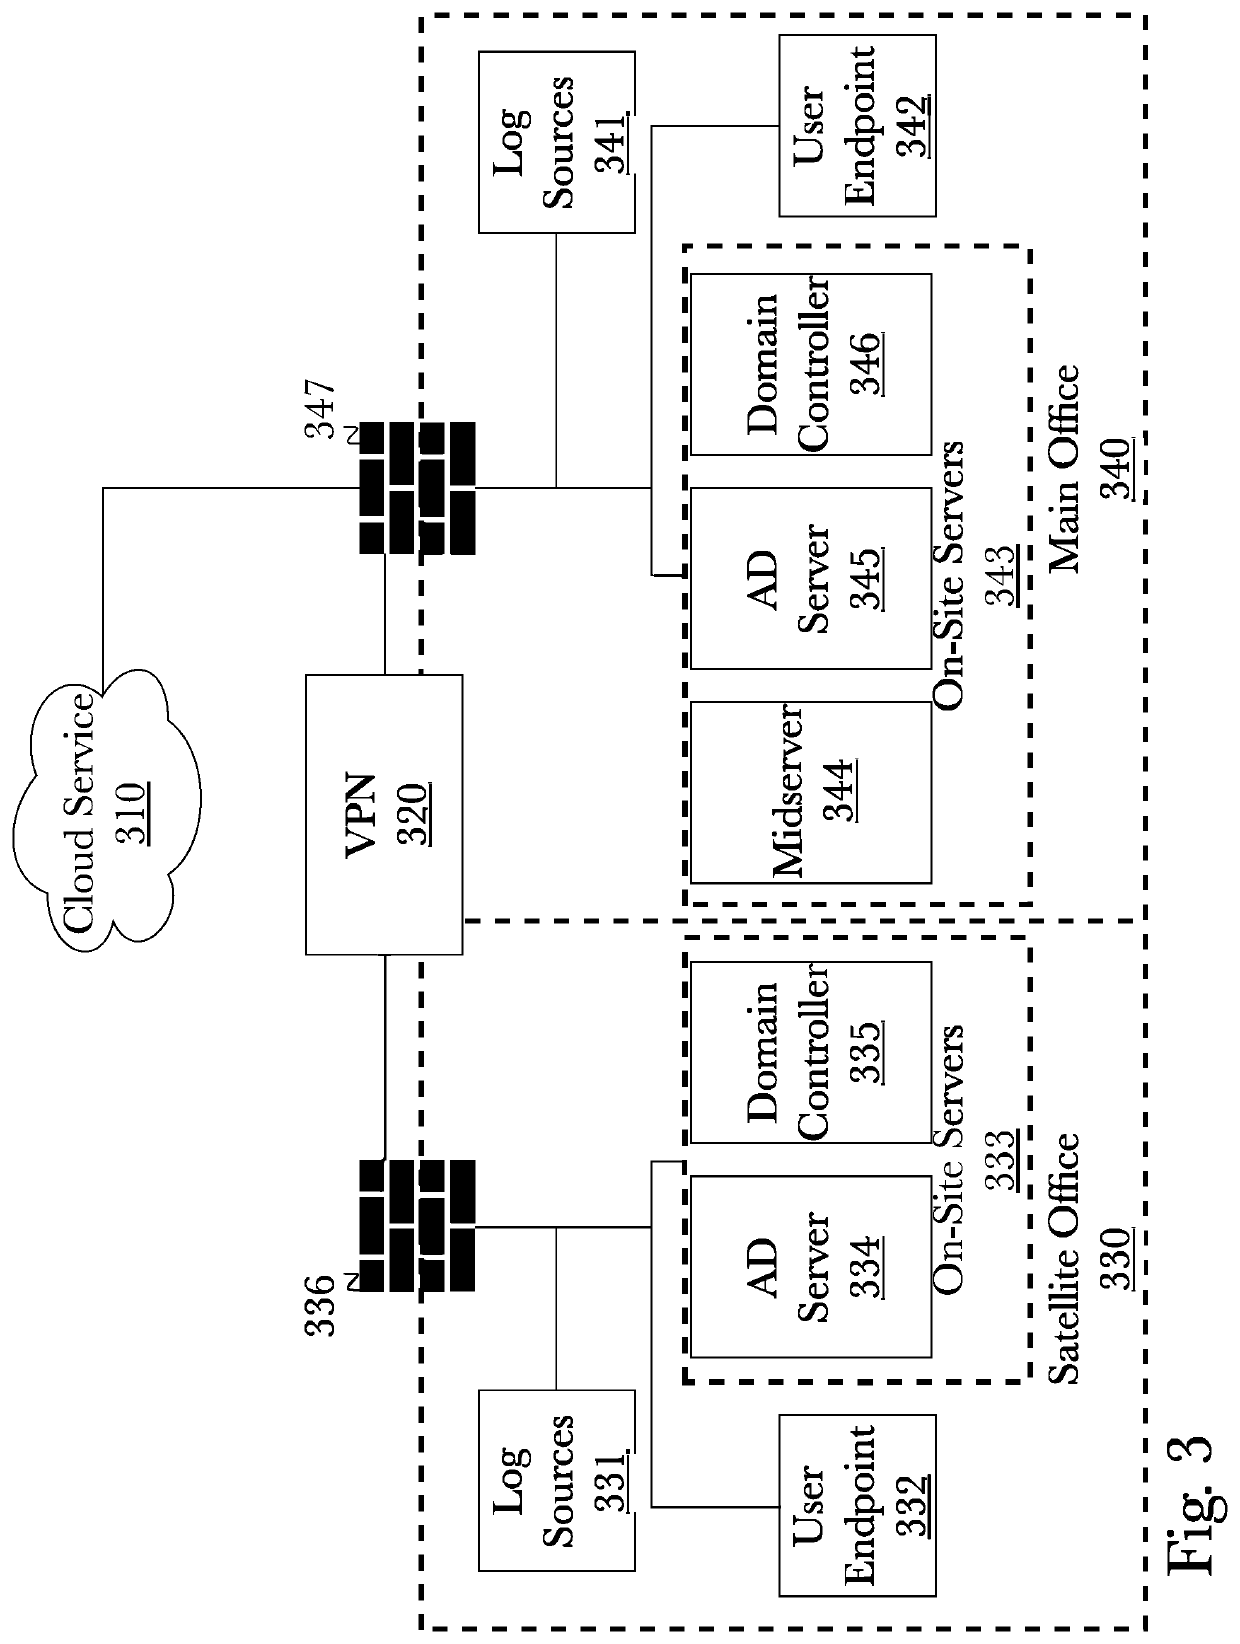 System and method for midserver facilitation of long-haul transport of telemetry for cloud-based services